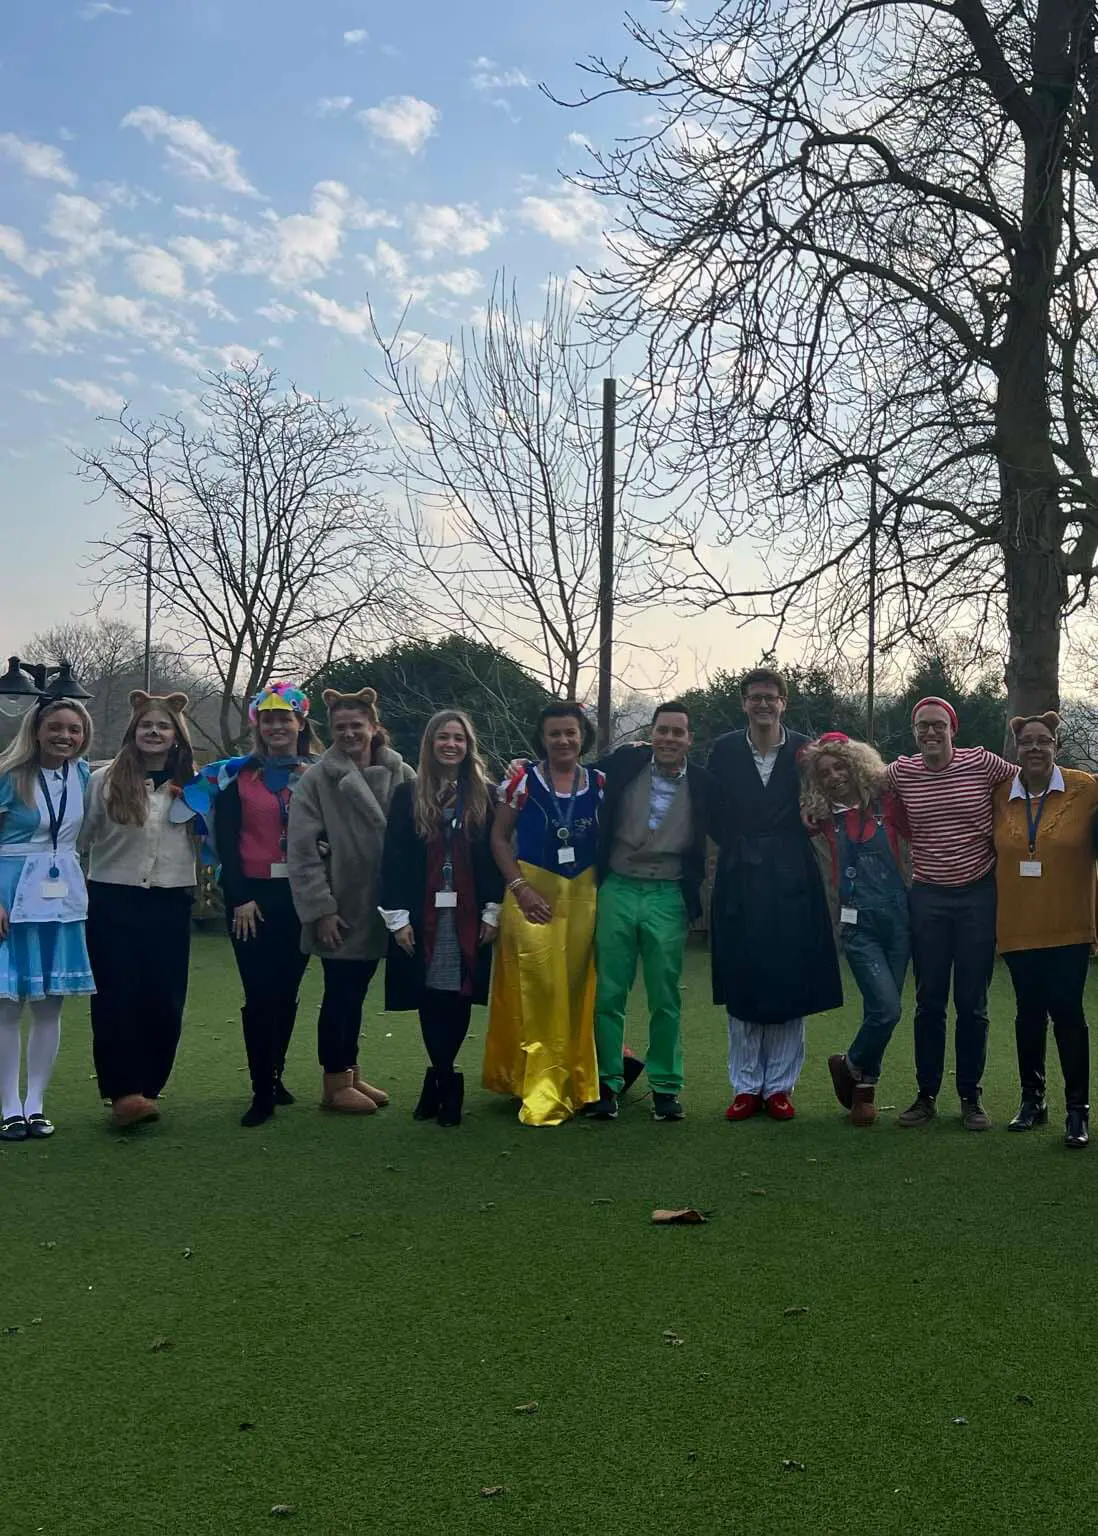 Children dressed up for world book day at Ibstock Place School, Roehampton, a private school near Richmond, Barnes, Putney, Kingston, & Wandsworth